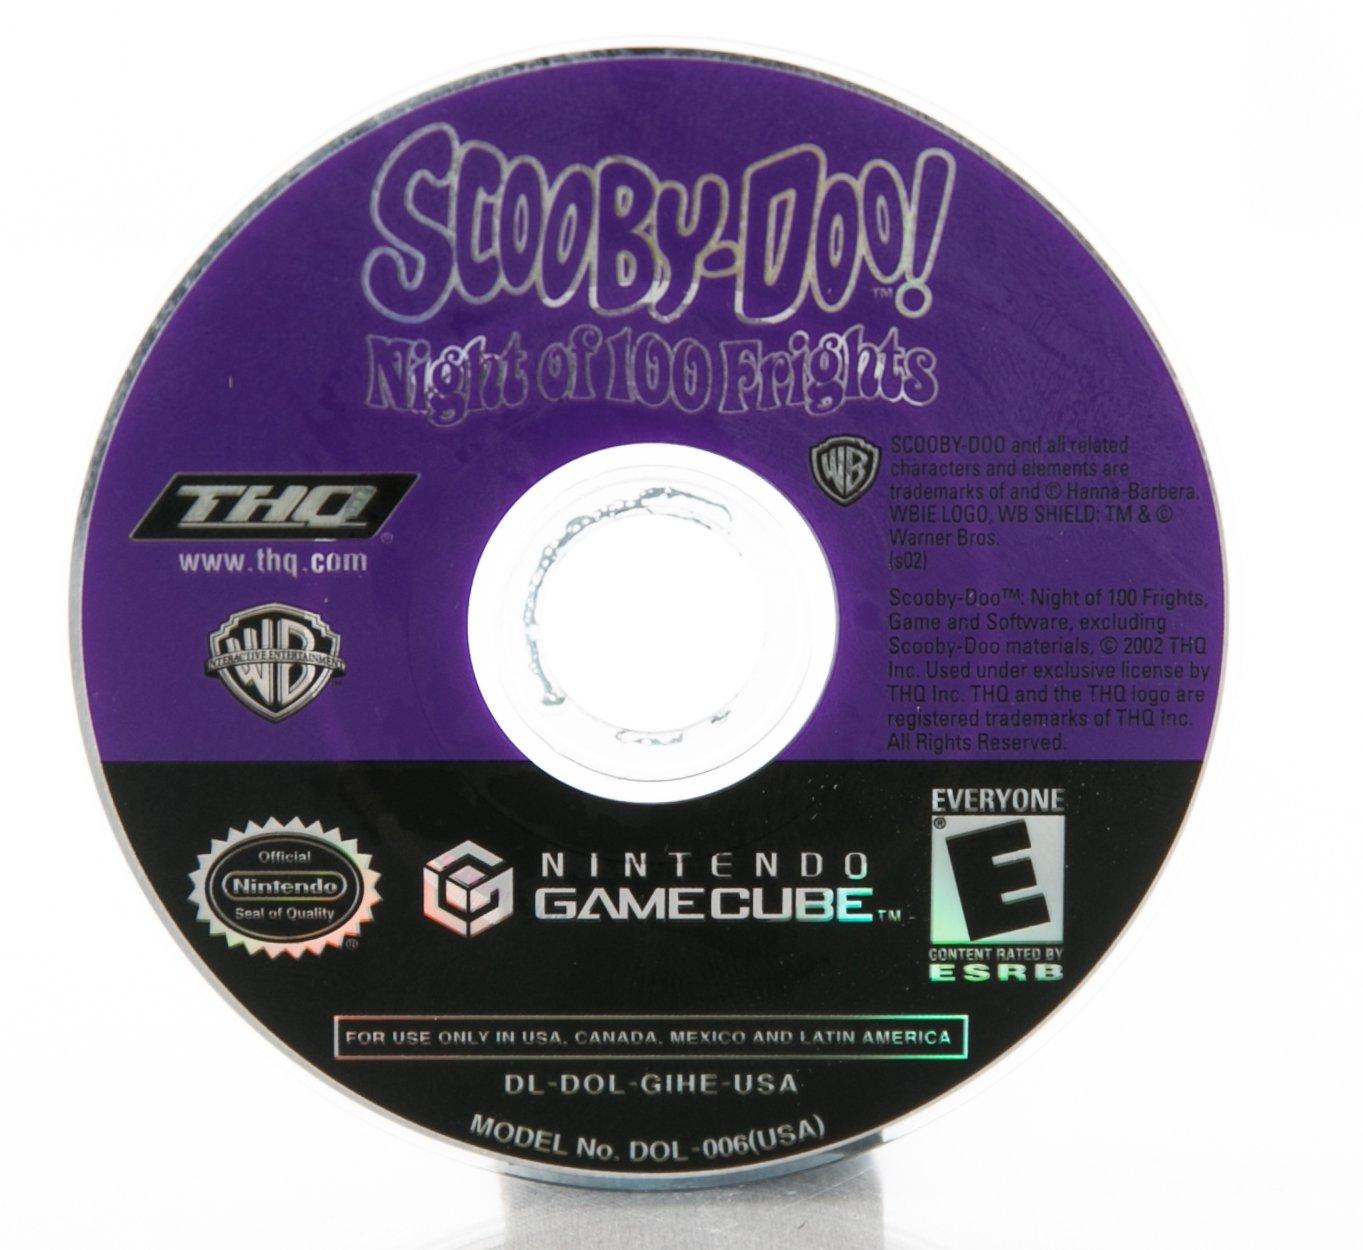 scooby doo night of 100 frights xbox one